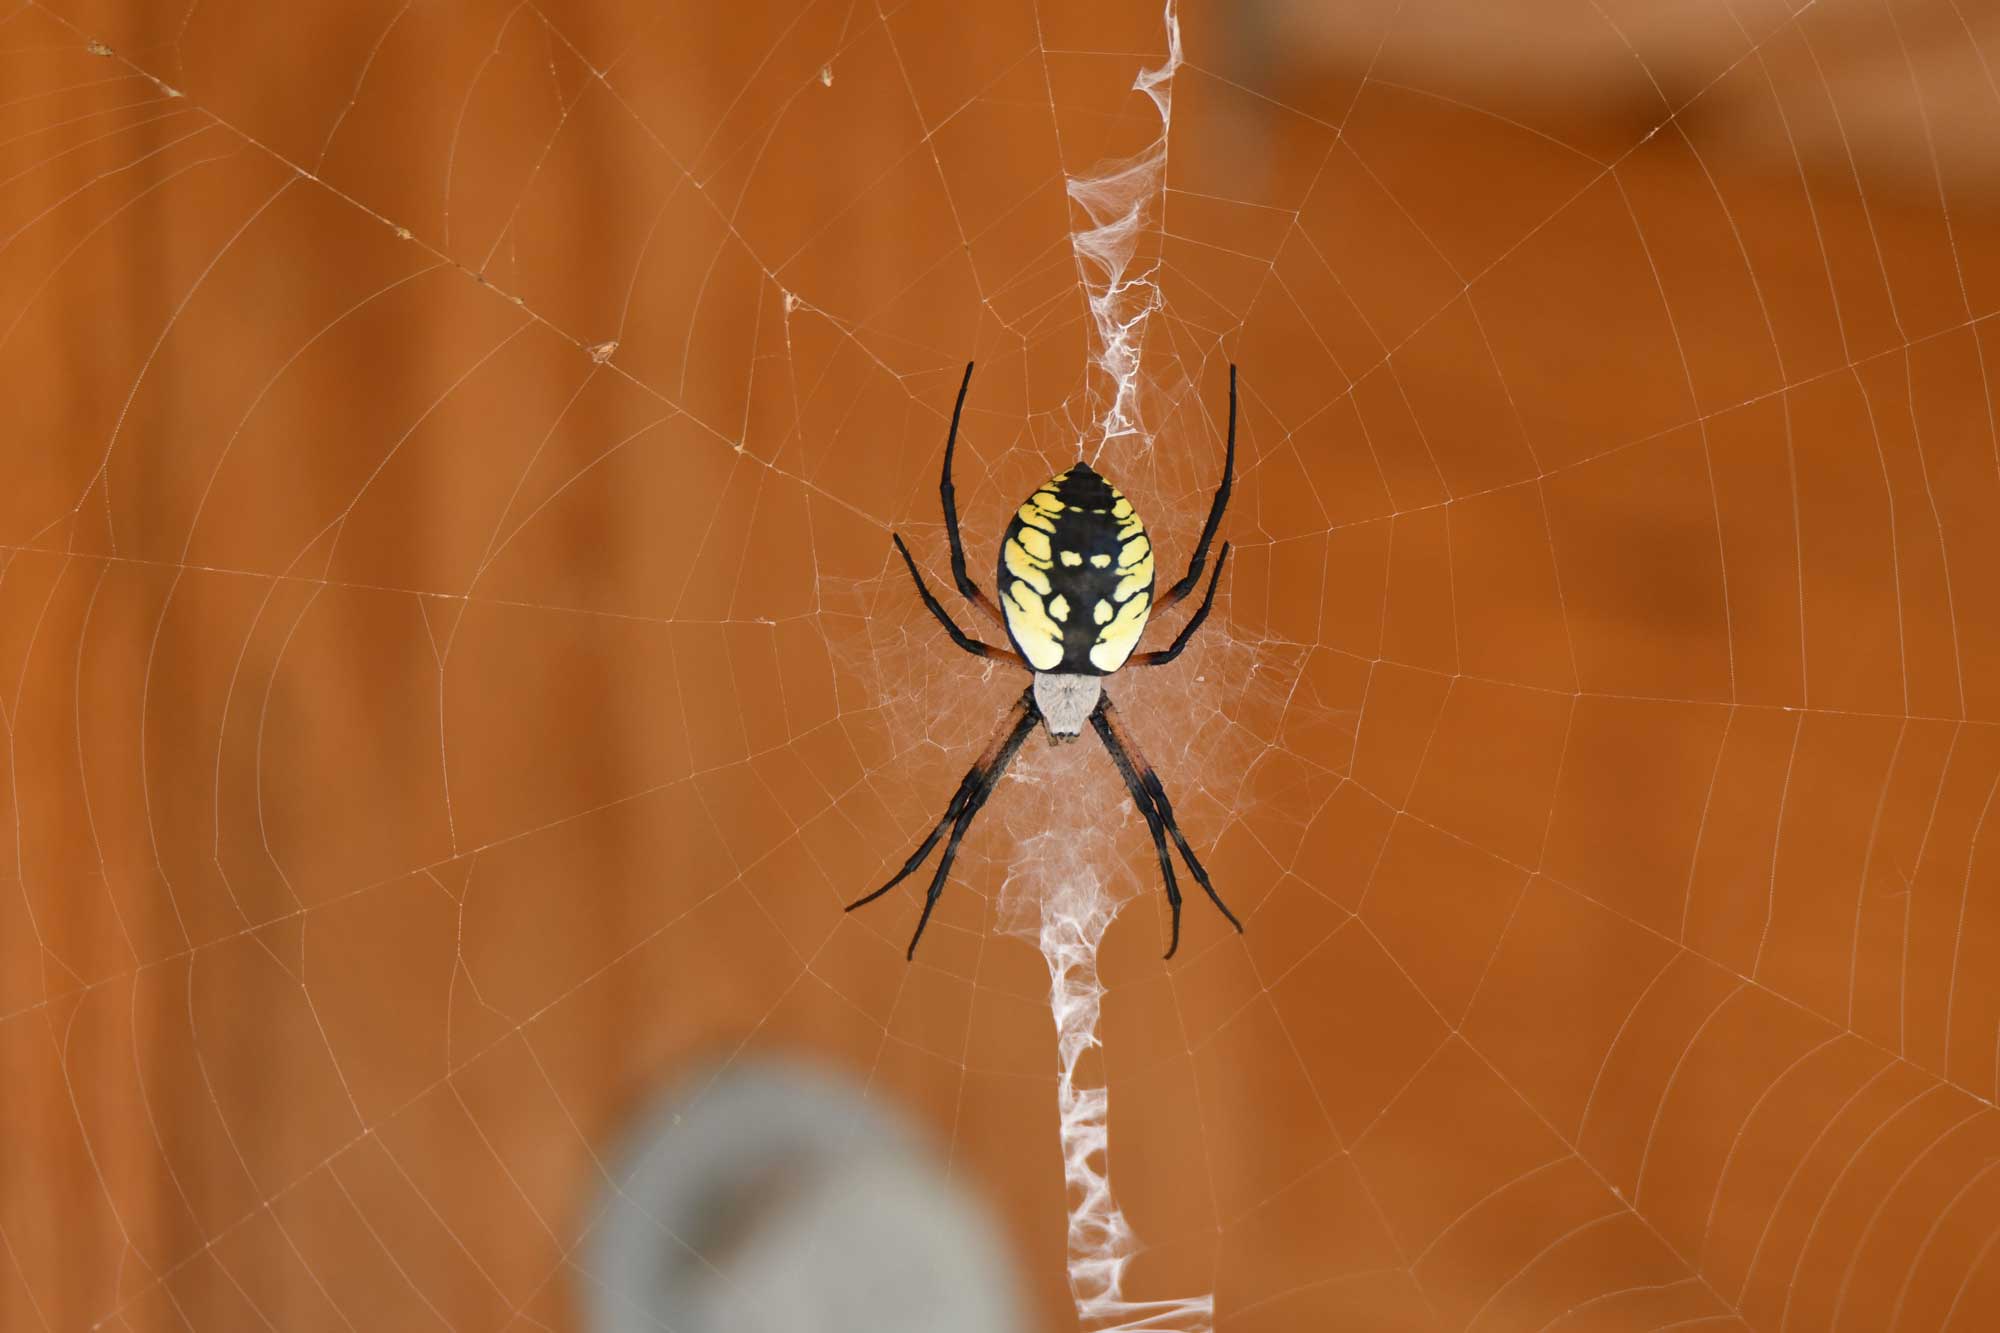 Your Next Outfit Could Be Made From Spider Silk